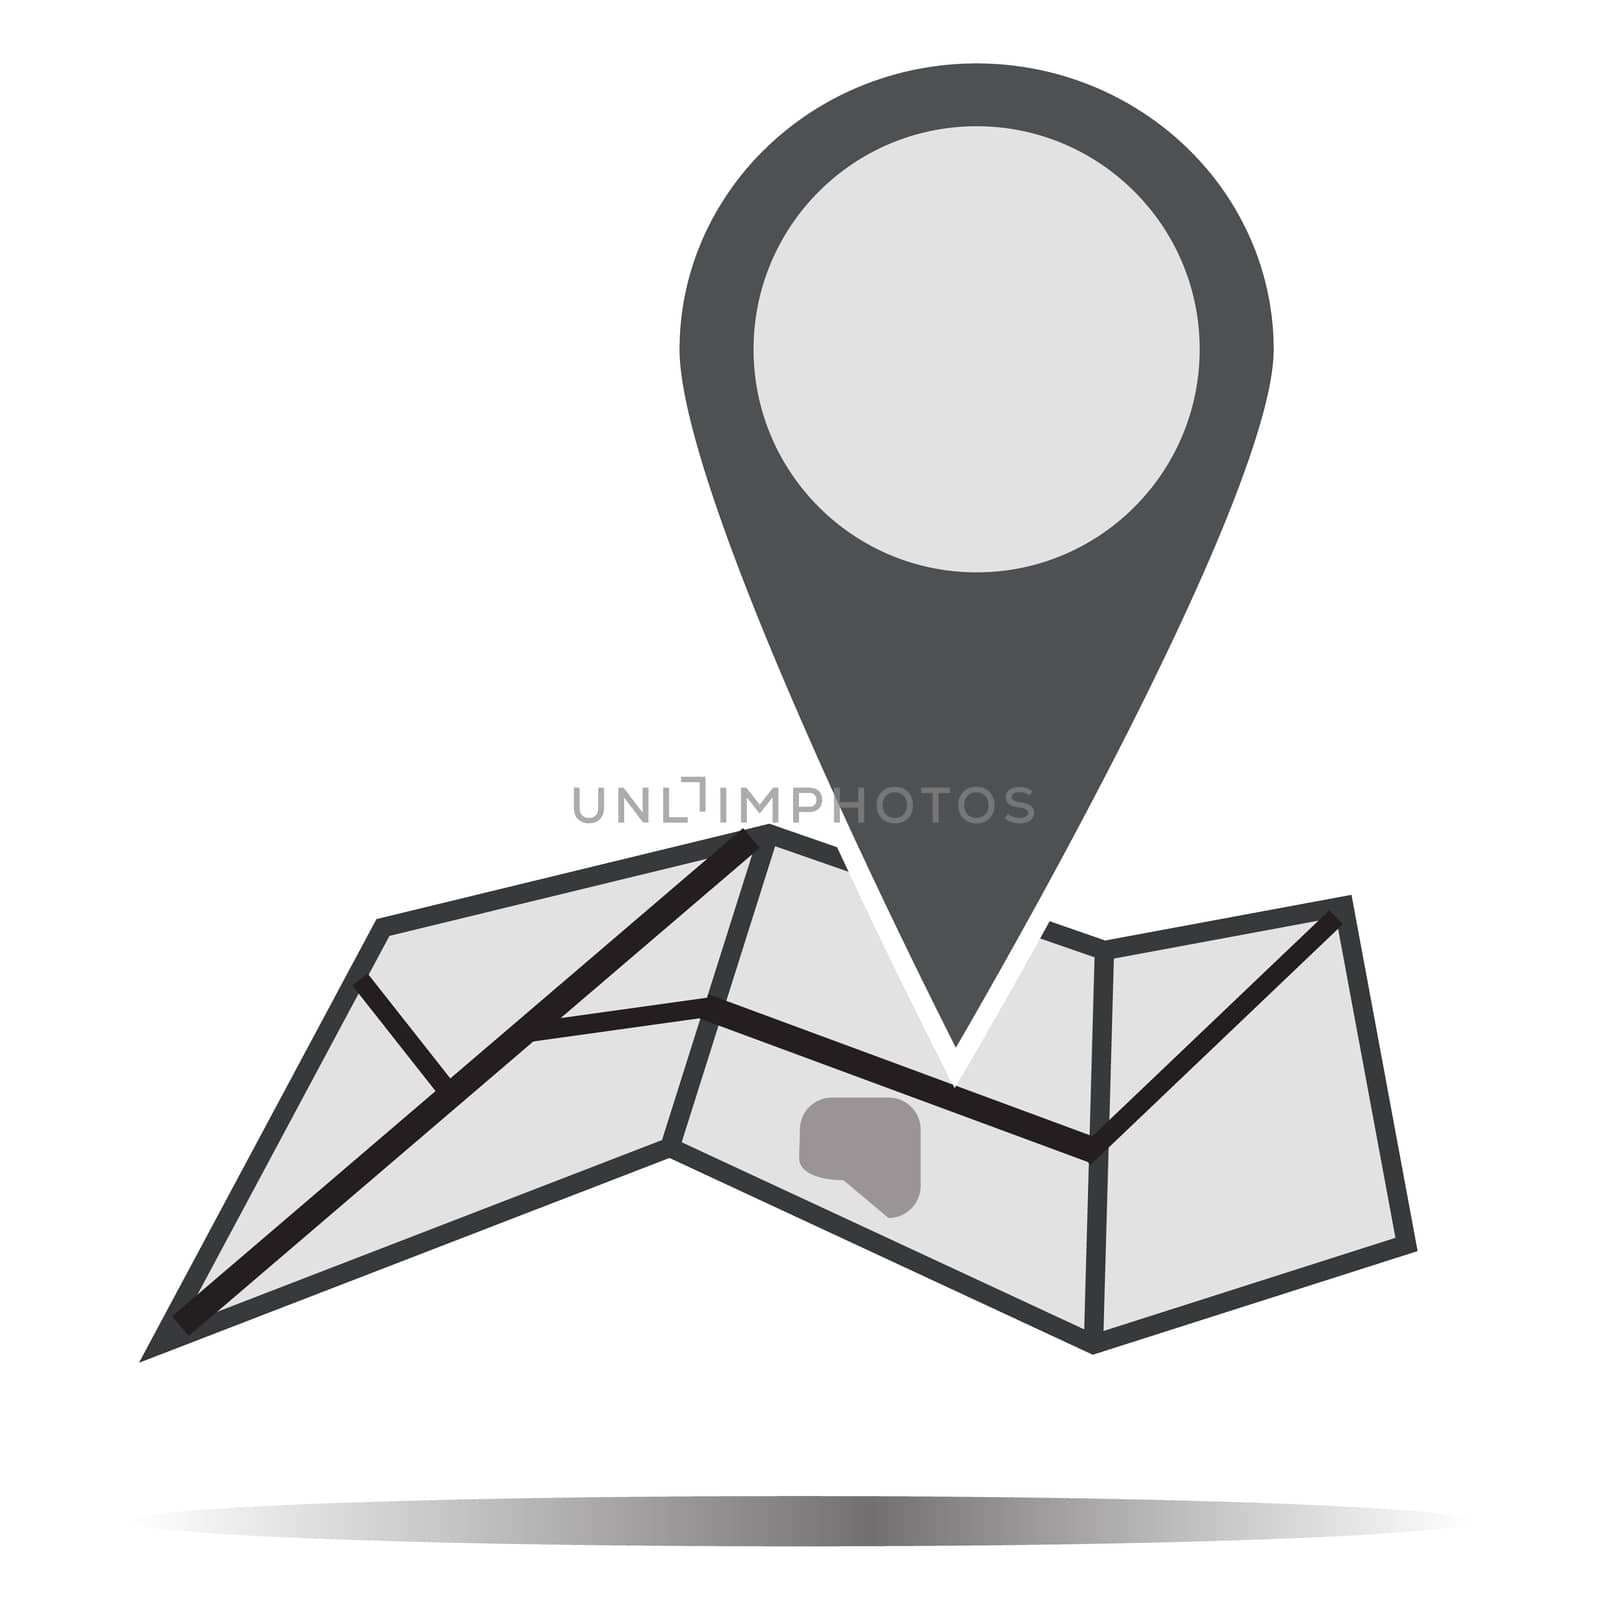 Pin on map sign. map icon on white background. map pin symbol.